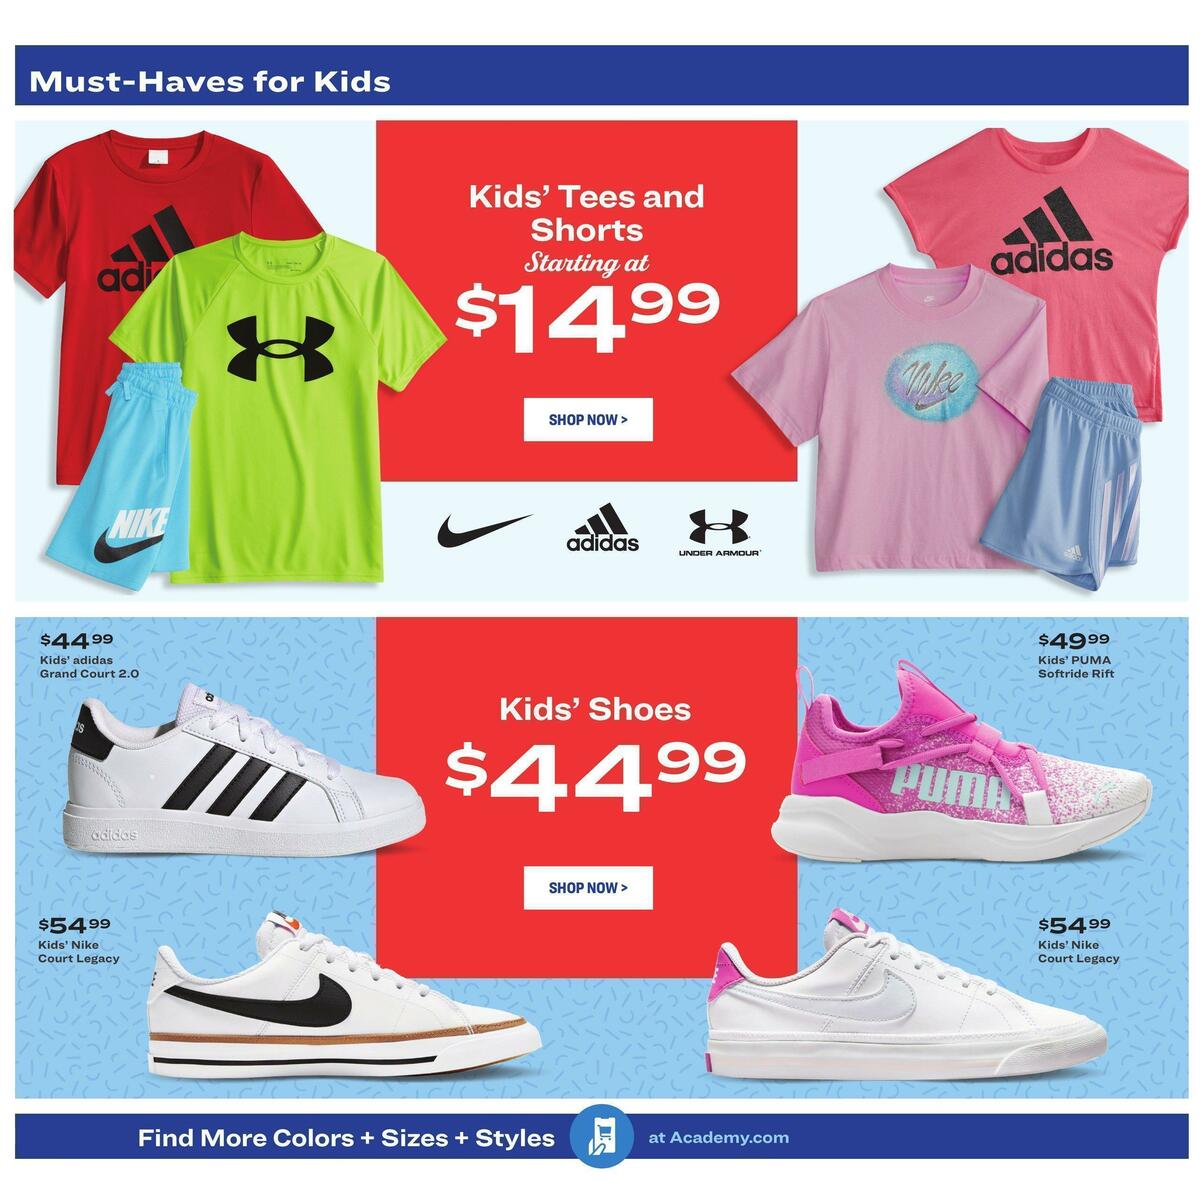 Academy Sports + Outdoors Weekly Ad from March 27